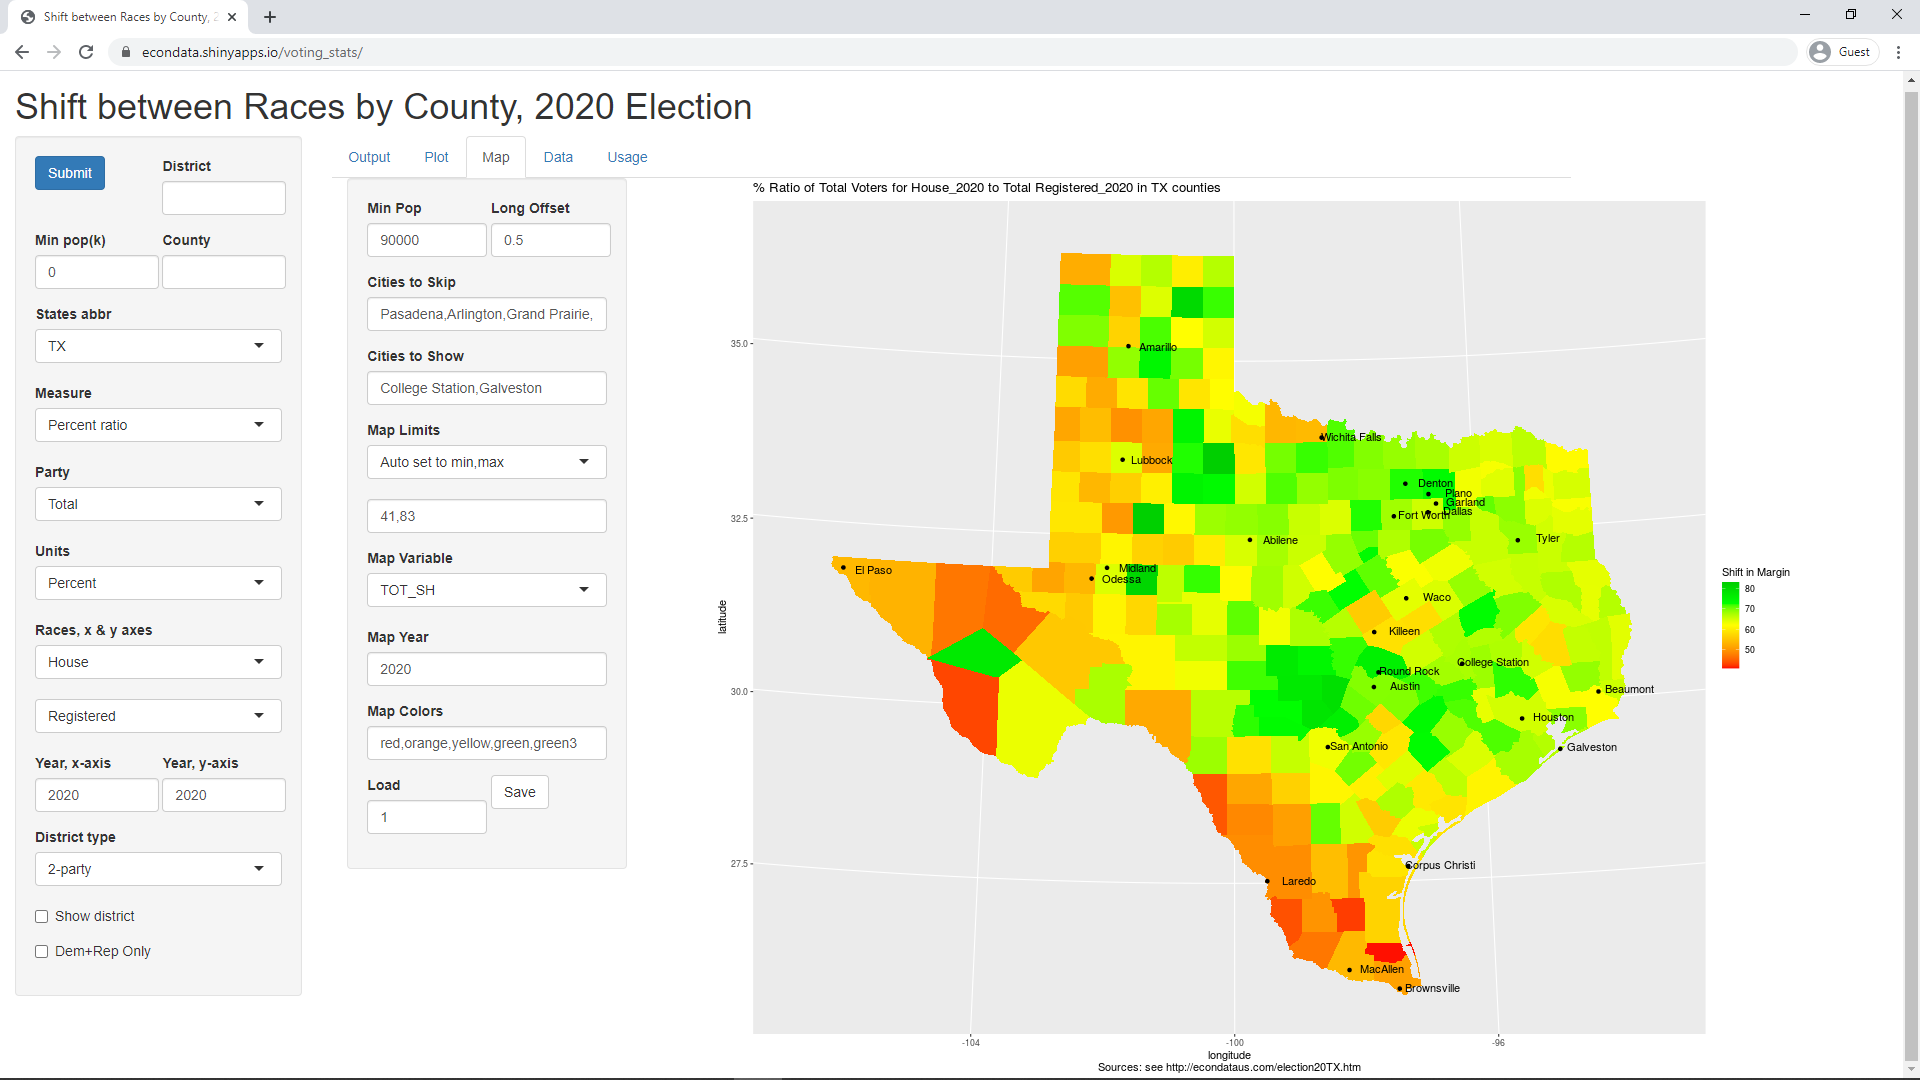 Percent ratio of Voters for House_2020 to Registered_2020 Voters in TX counties (Percent)